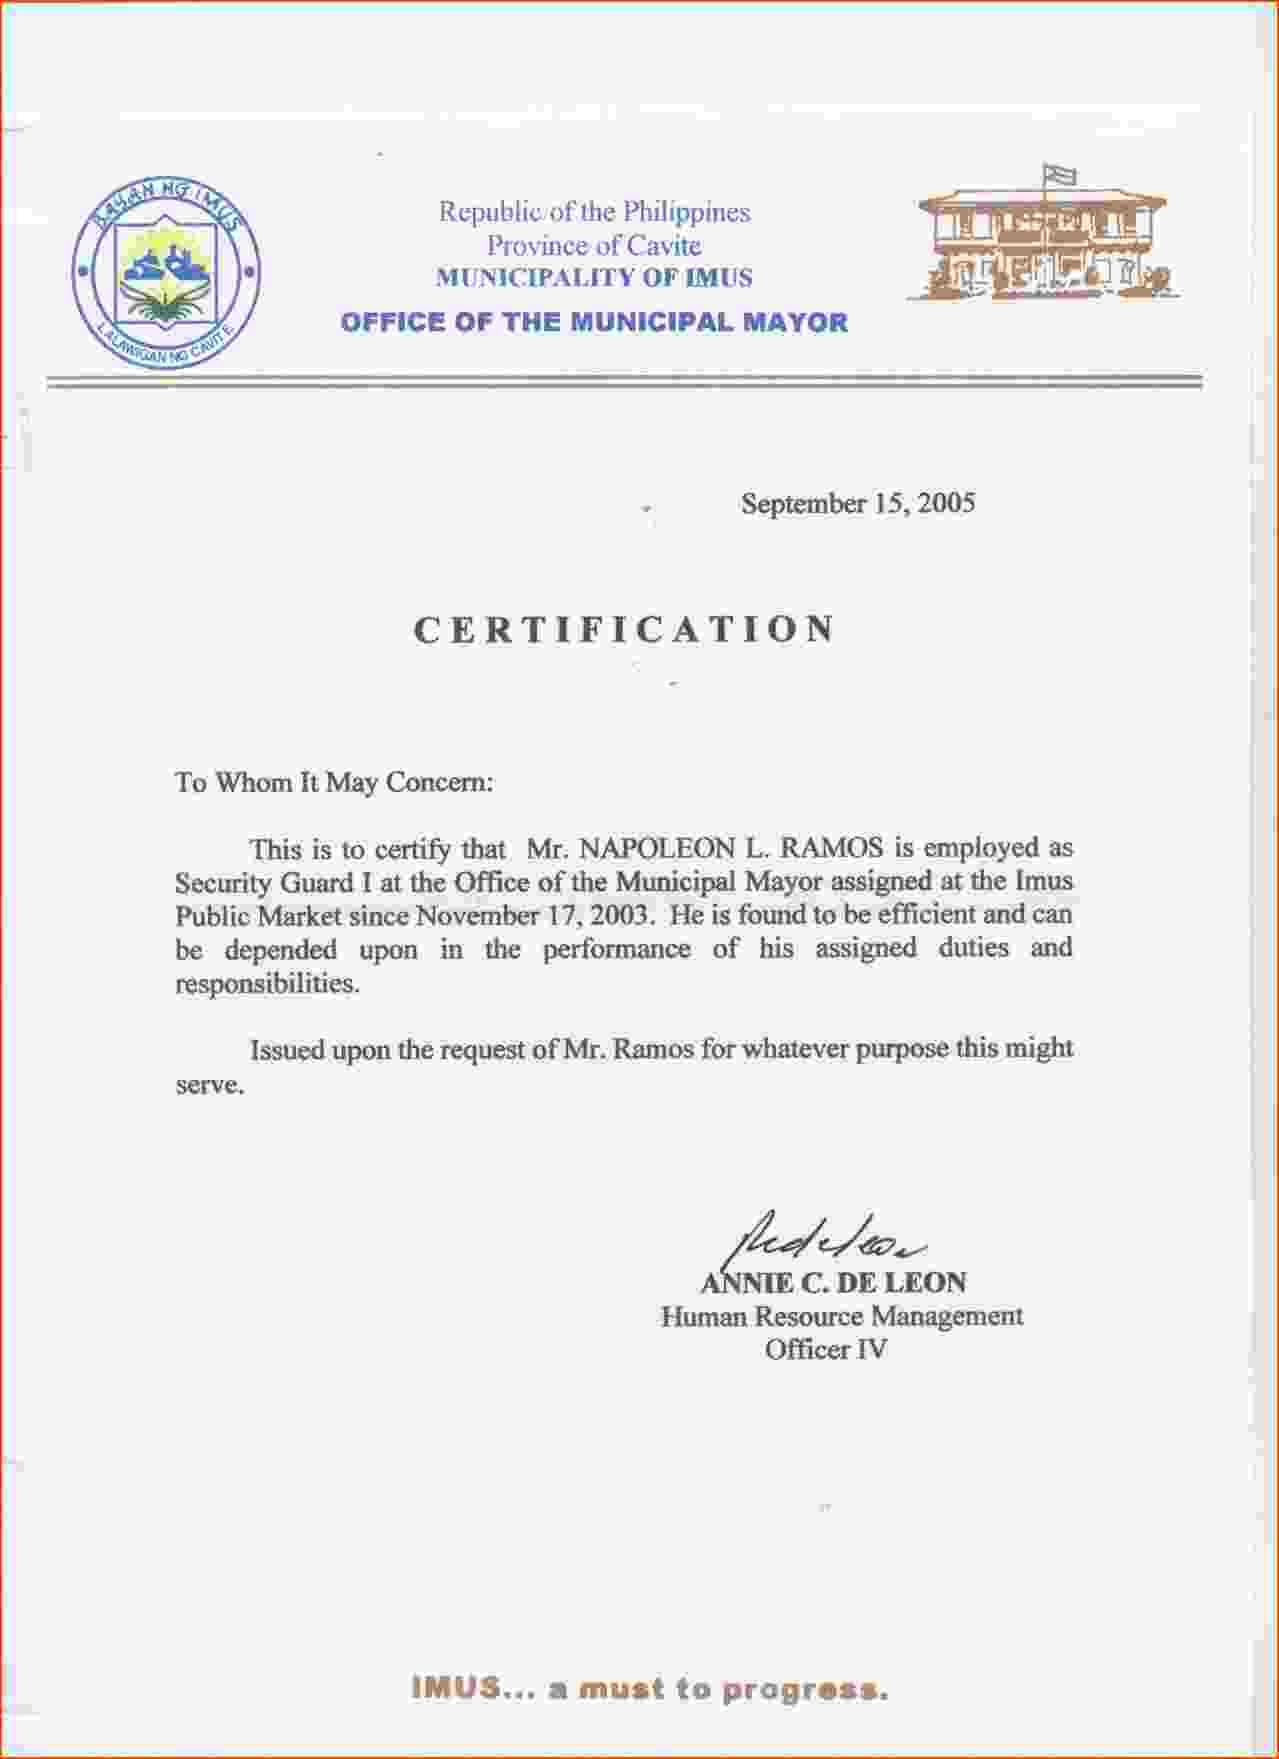 Sample Certificate Of Employment Certification Tugon Med For